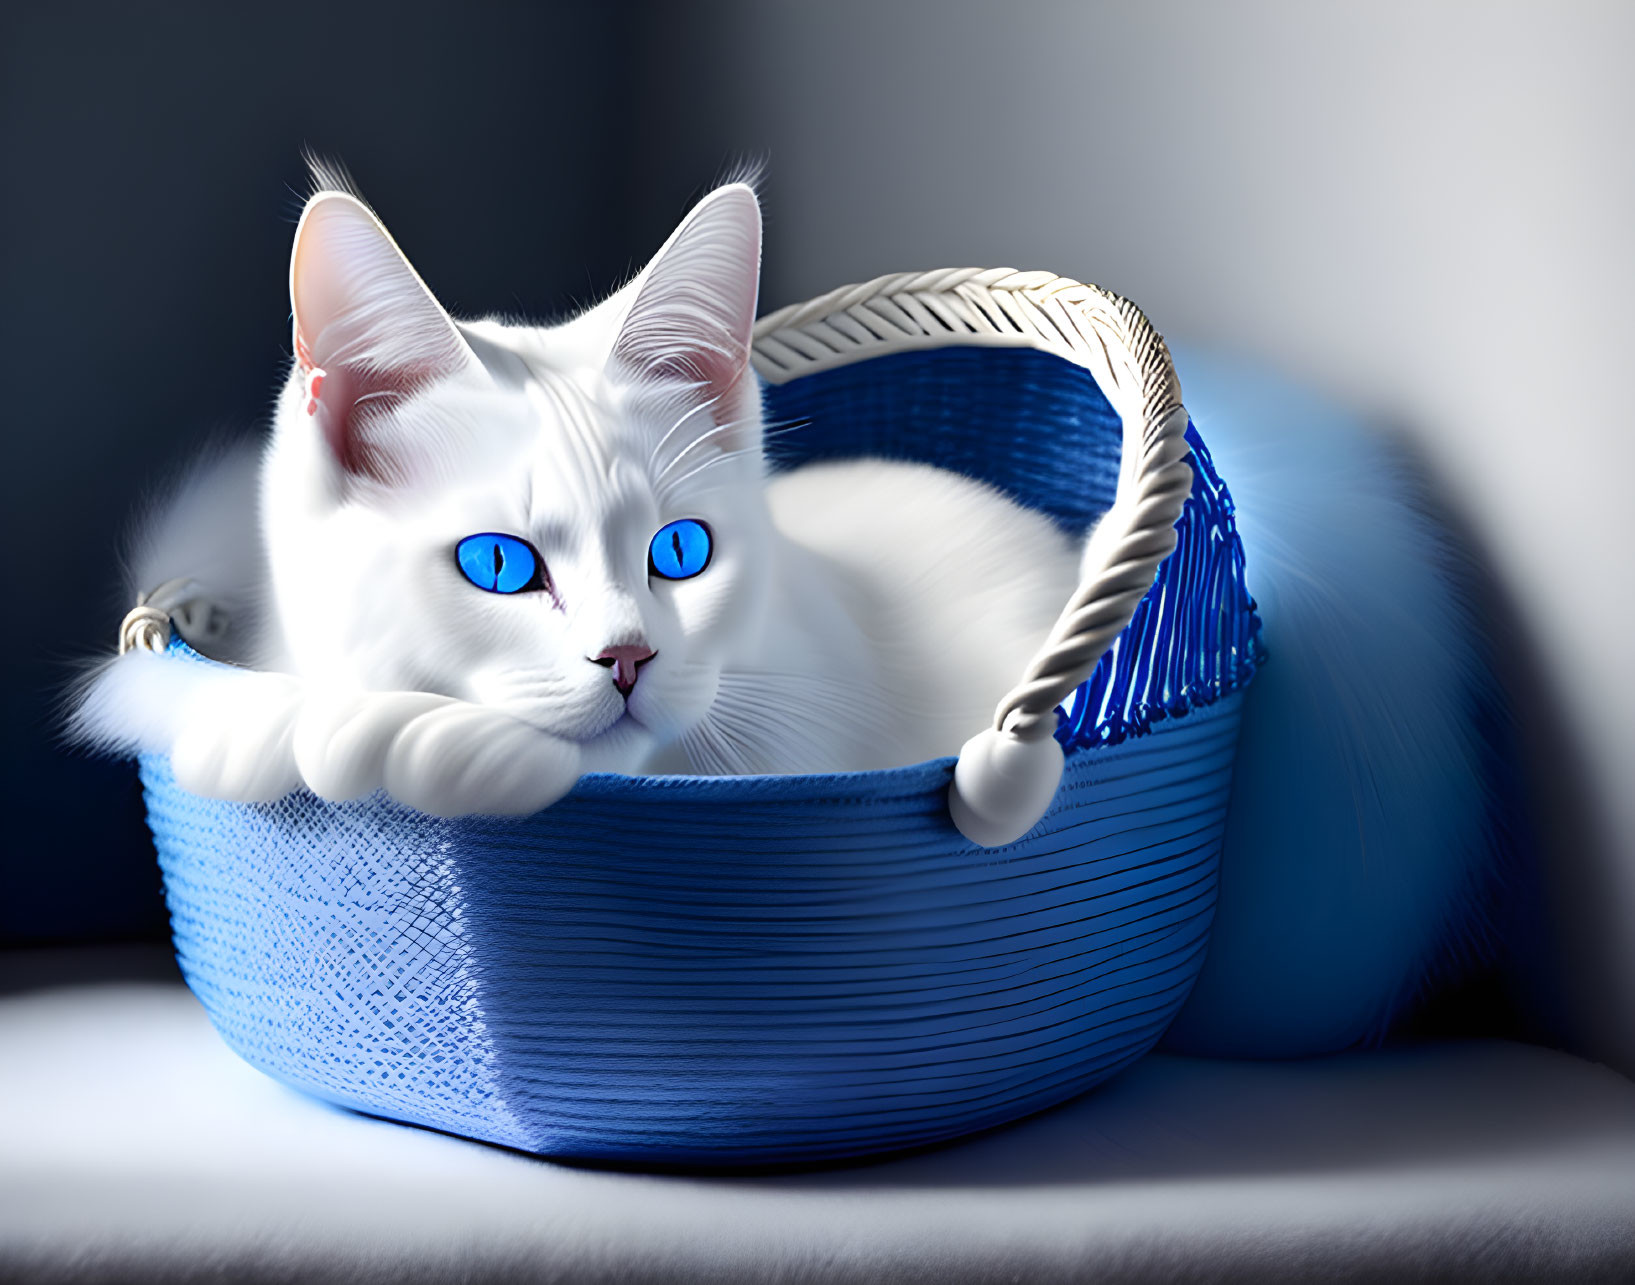 White Cat with Blue Eyes in Woven Basket and Pillow Background